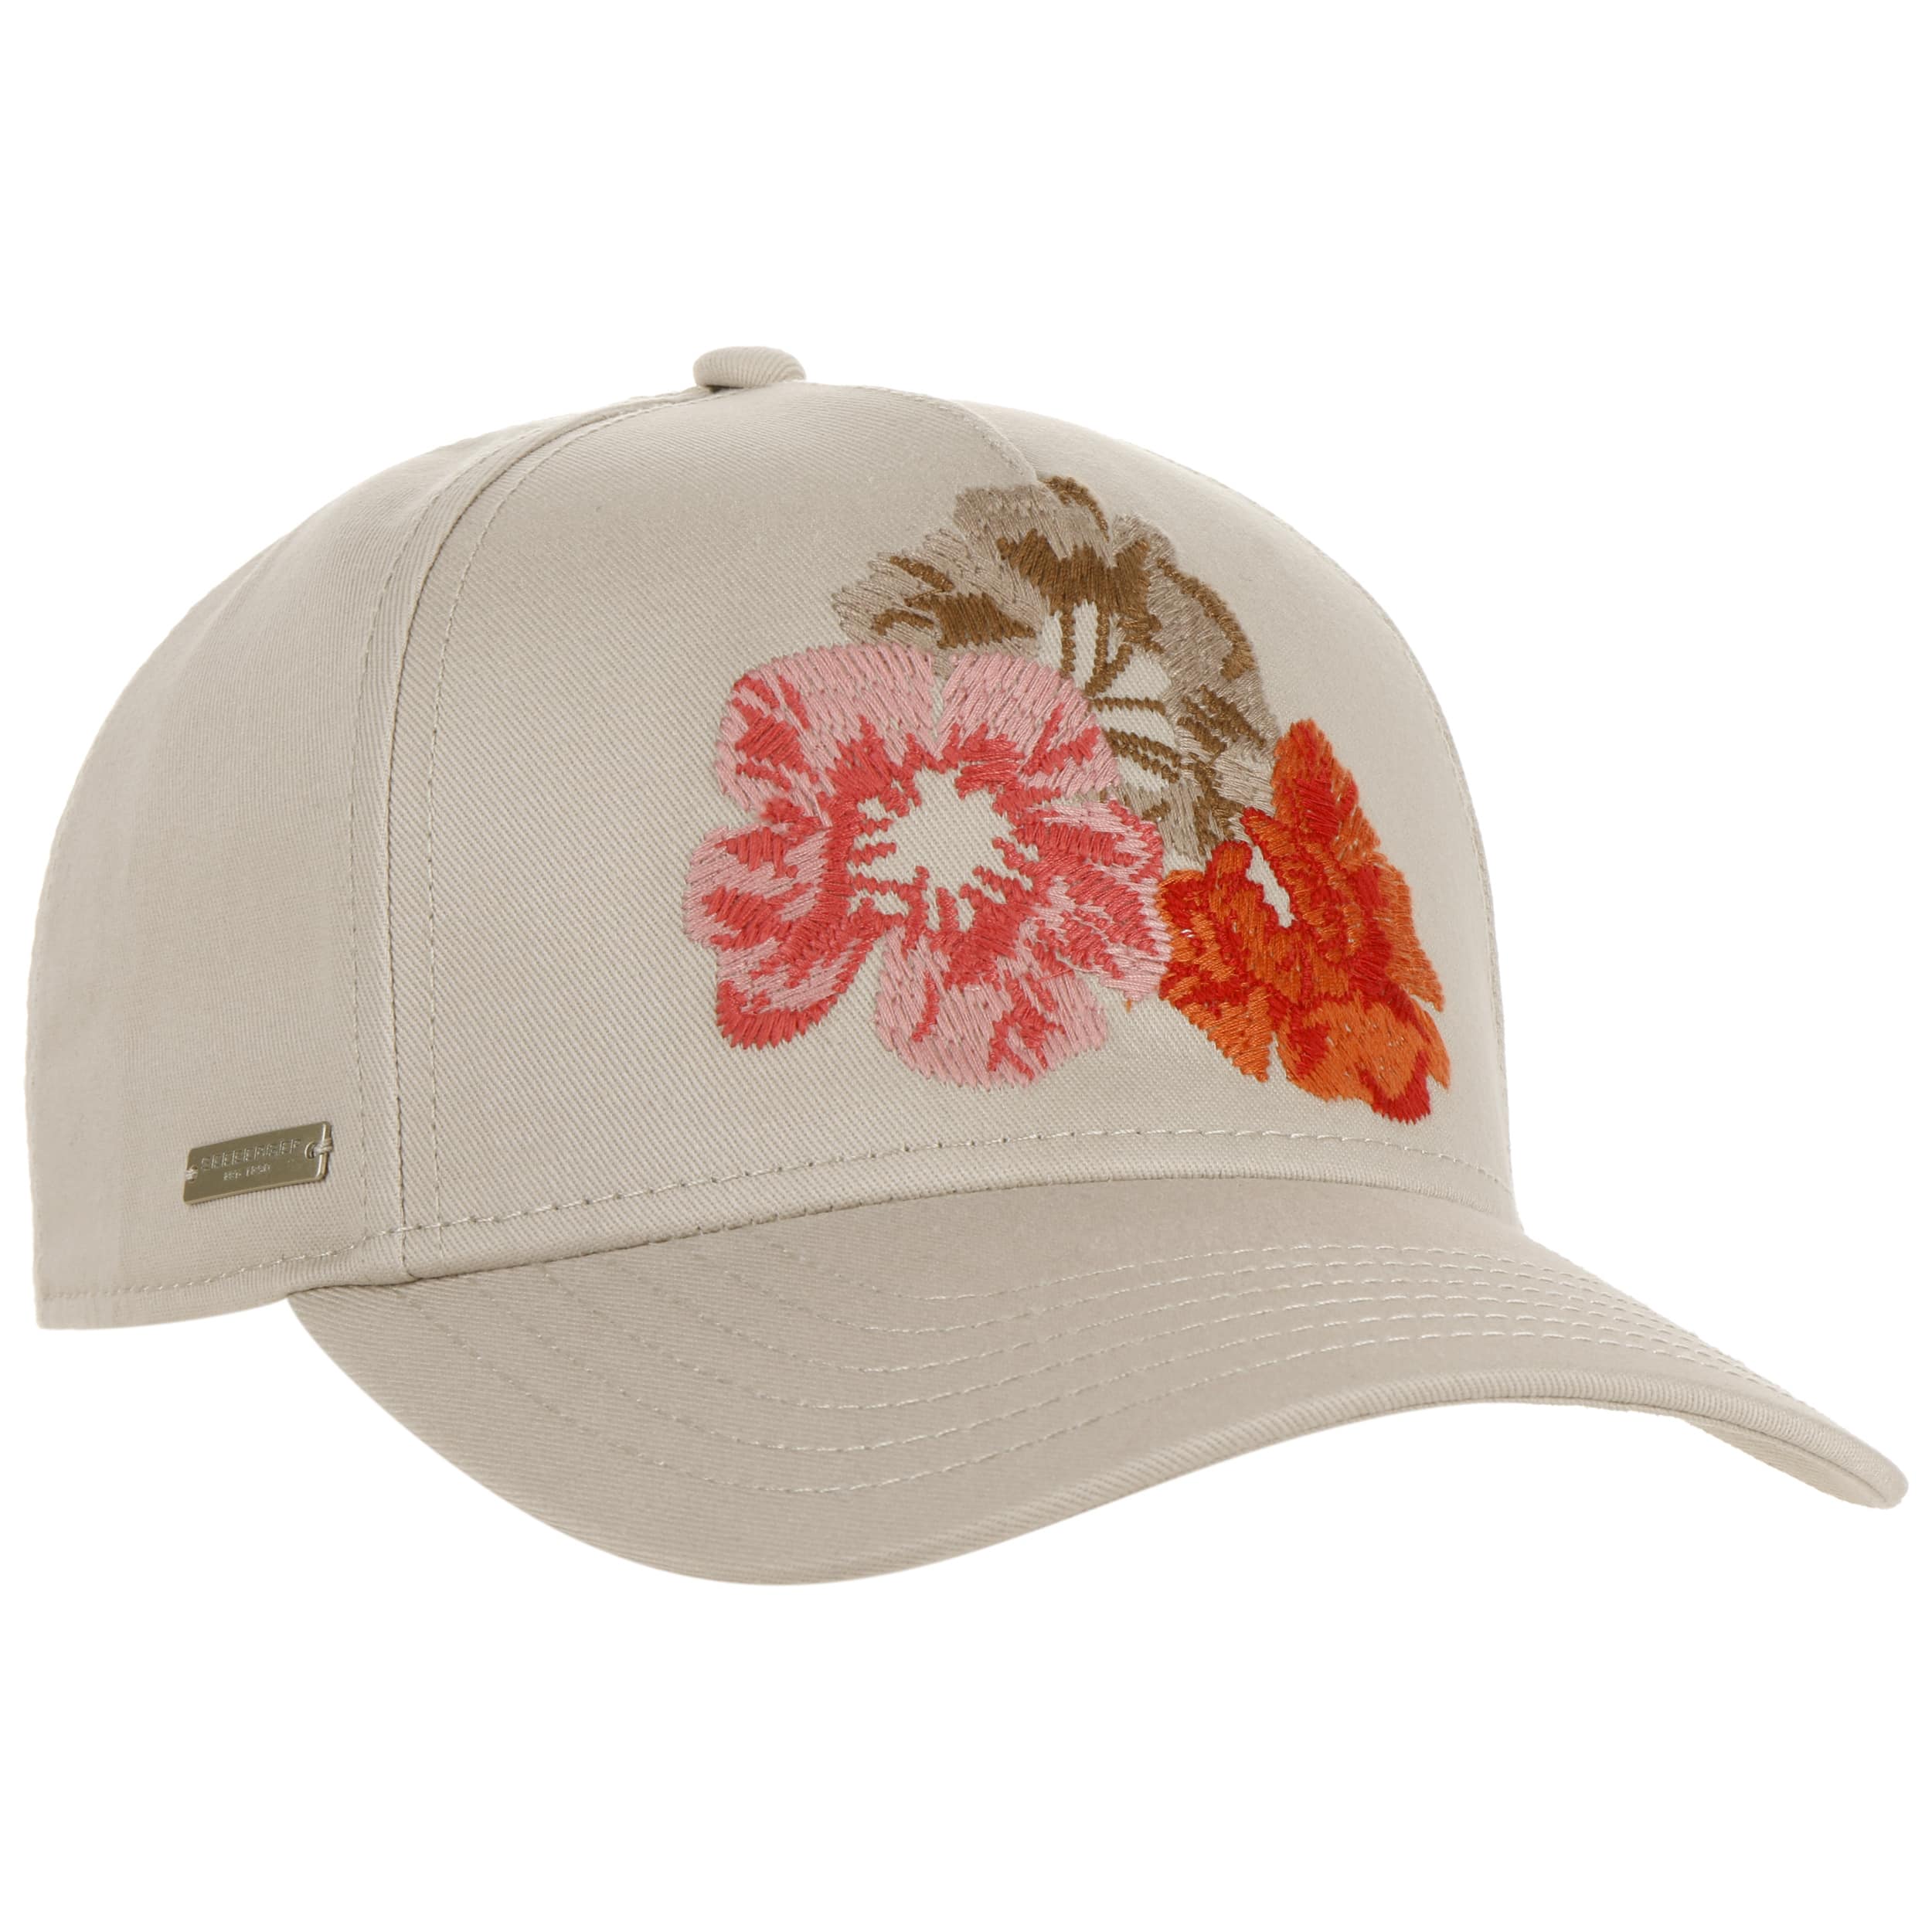 Stitched Flowers Cap by Seeberger